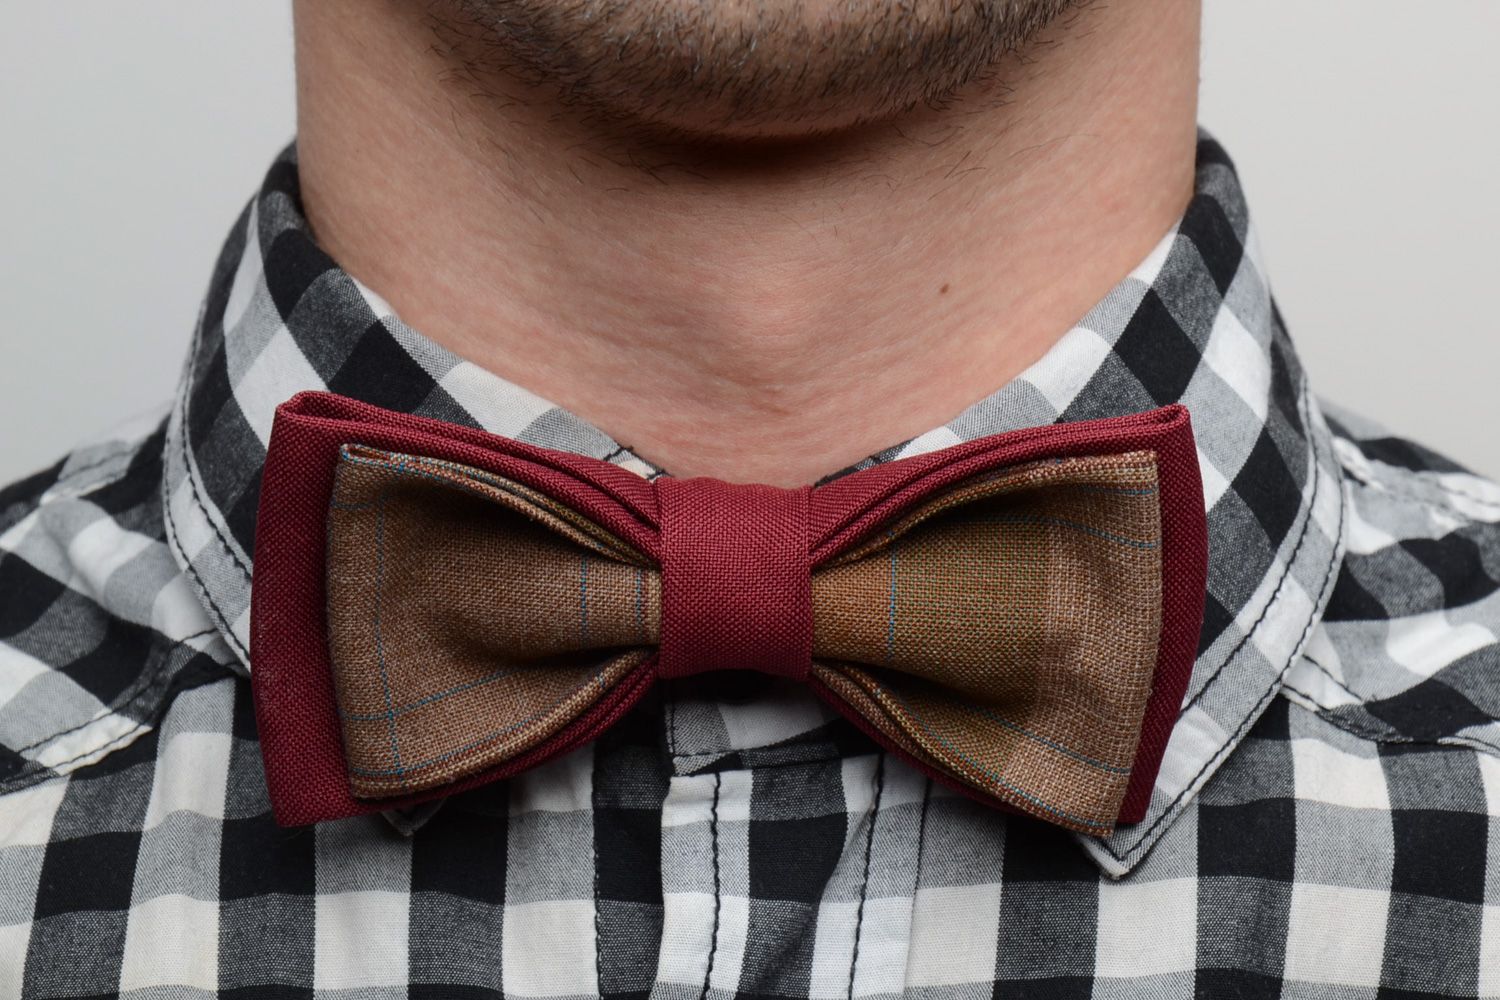 Handmade stylish bow tie sewn of costume fabric of dark red and brown colors photo 1